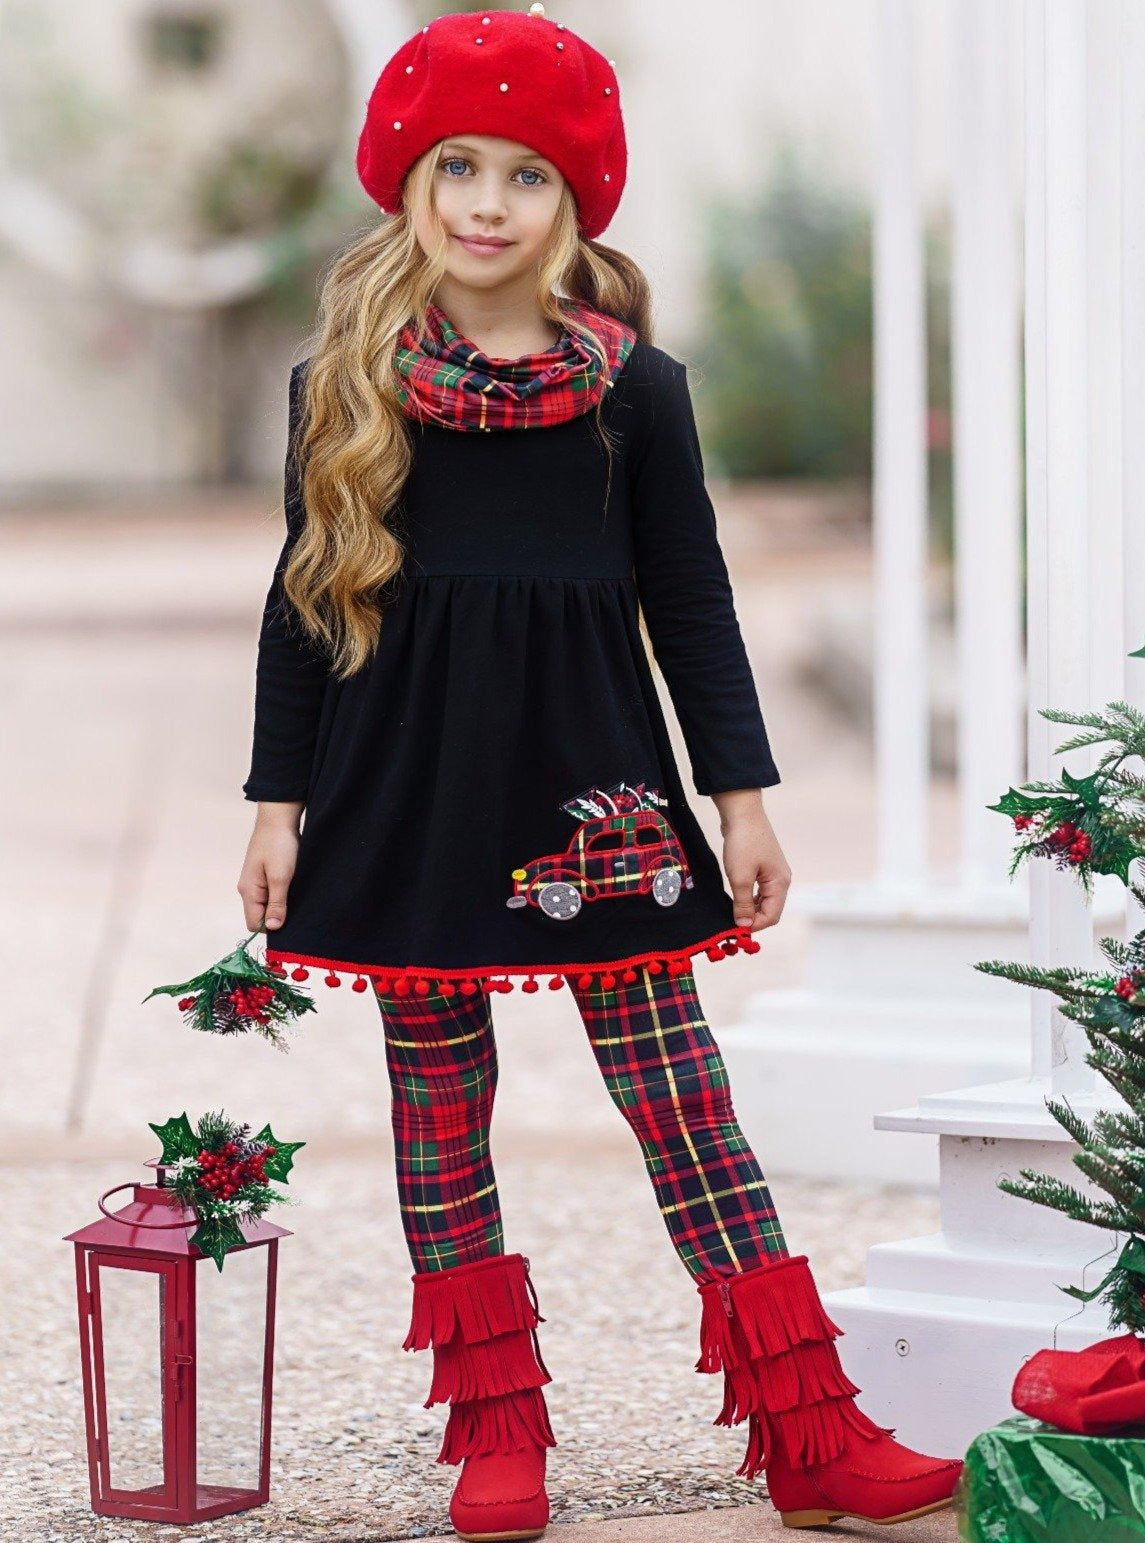 Sequin Leggings Outfit-Merry Xmas & Happy Holidays! - The Travelin' Gal